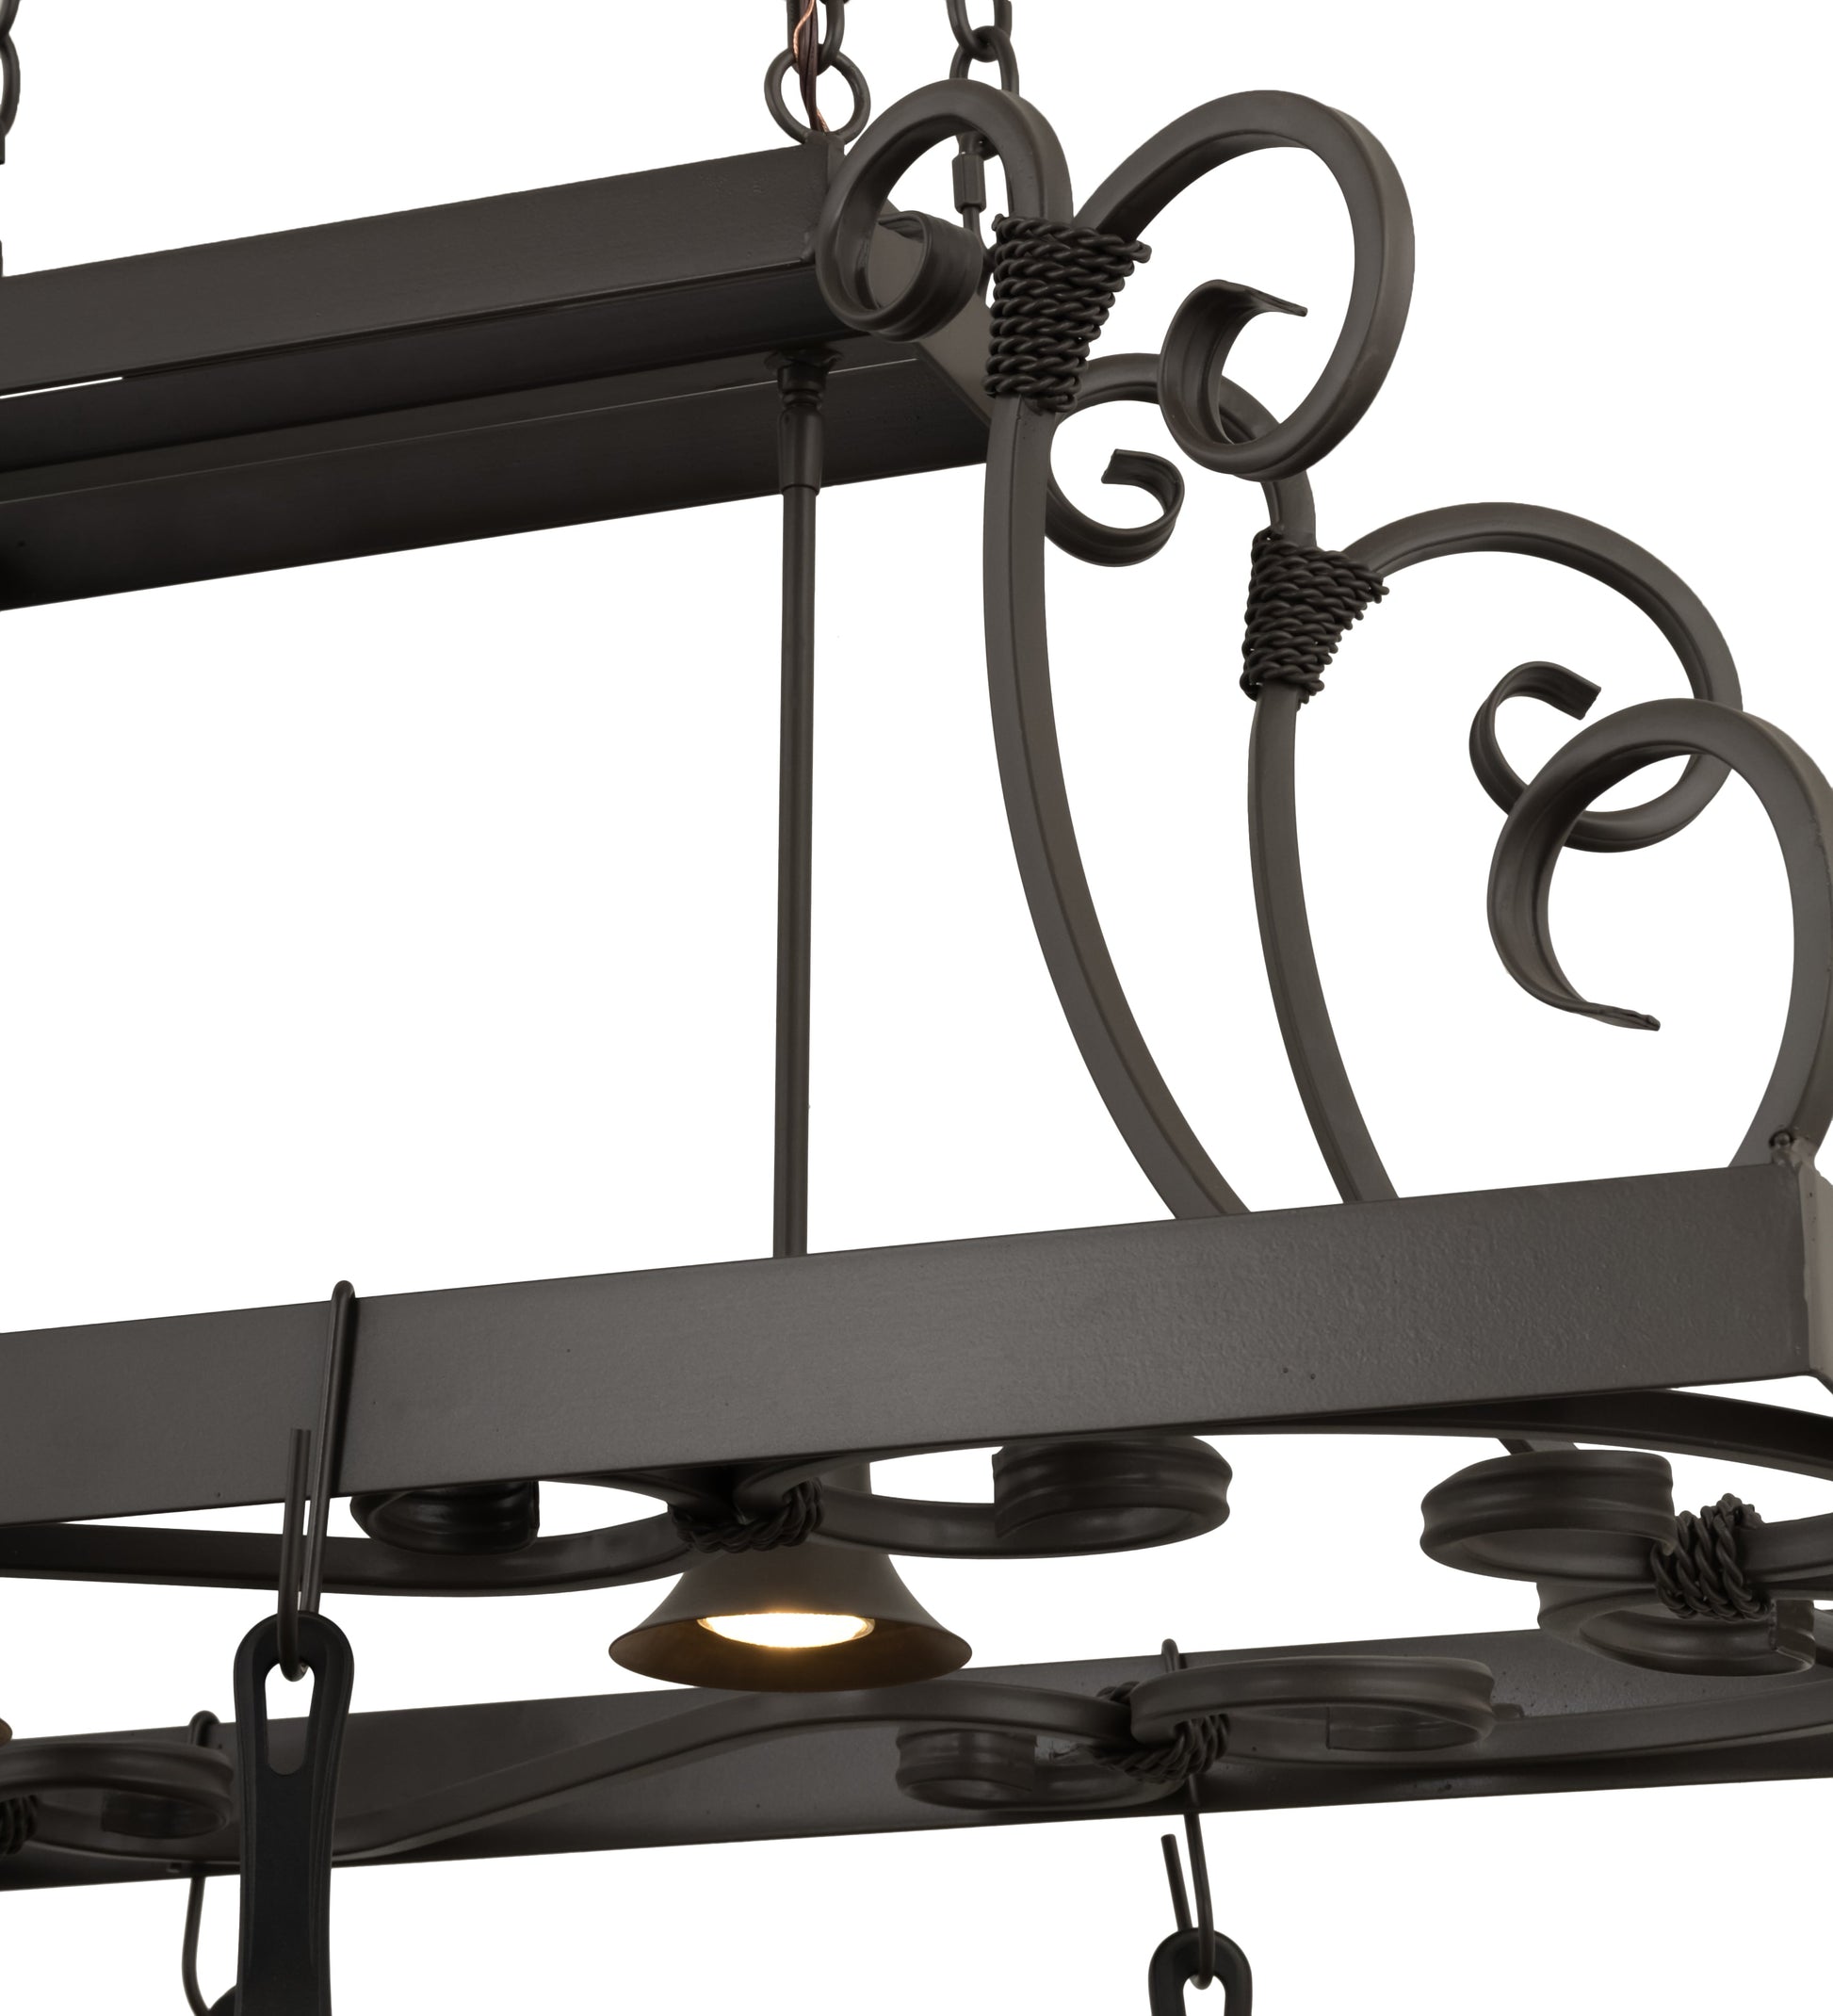 43" Long Caiden Pot Rack by 2nd Ave Lighting